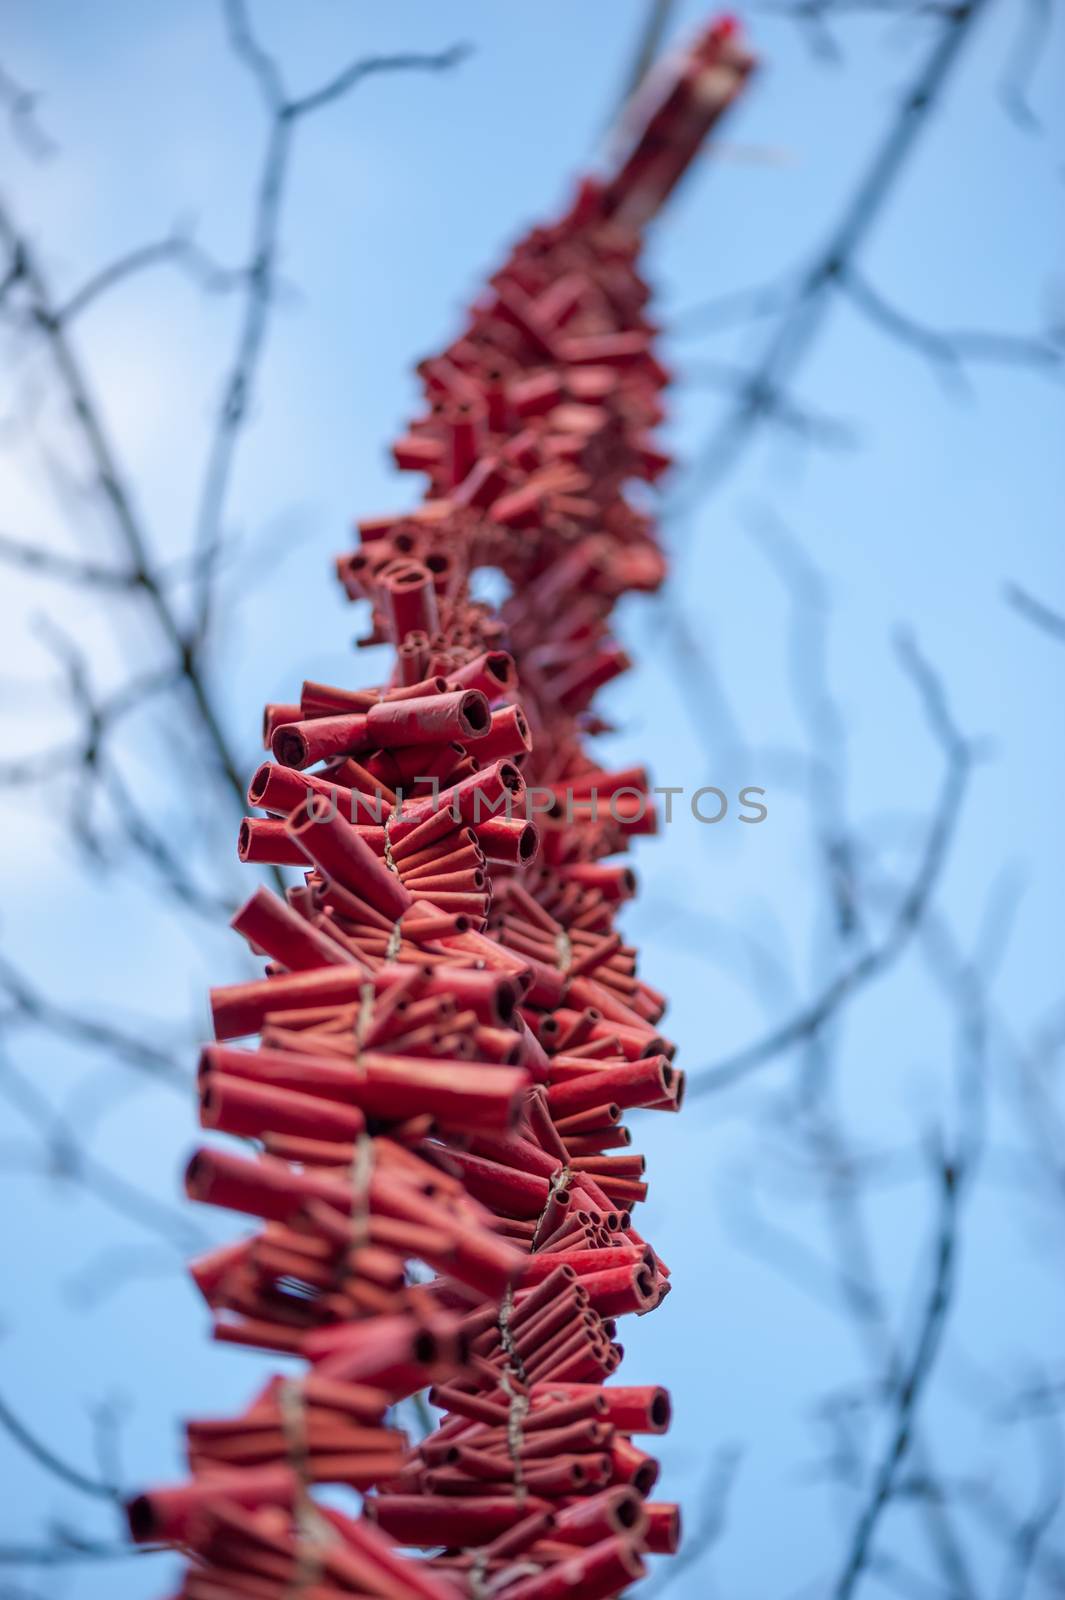 Stripe of red firecrackers hanging  in a tree against blue sky for the chinese new year